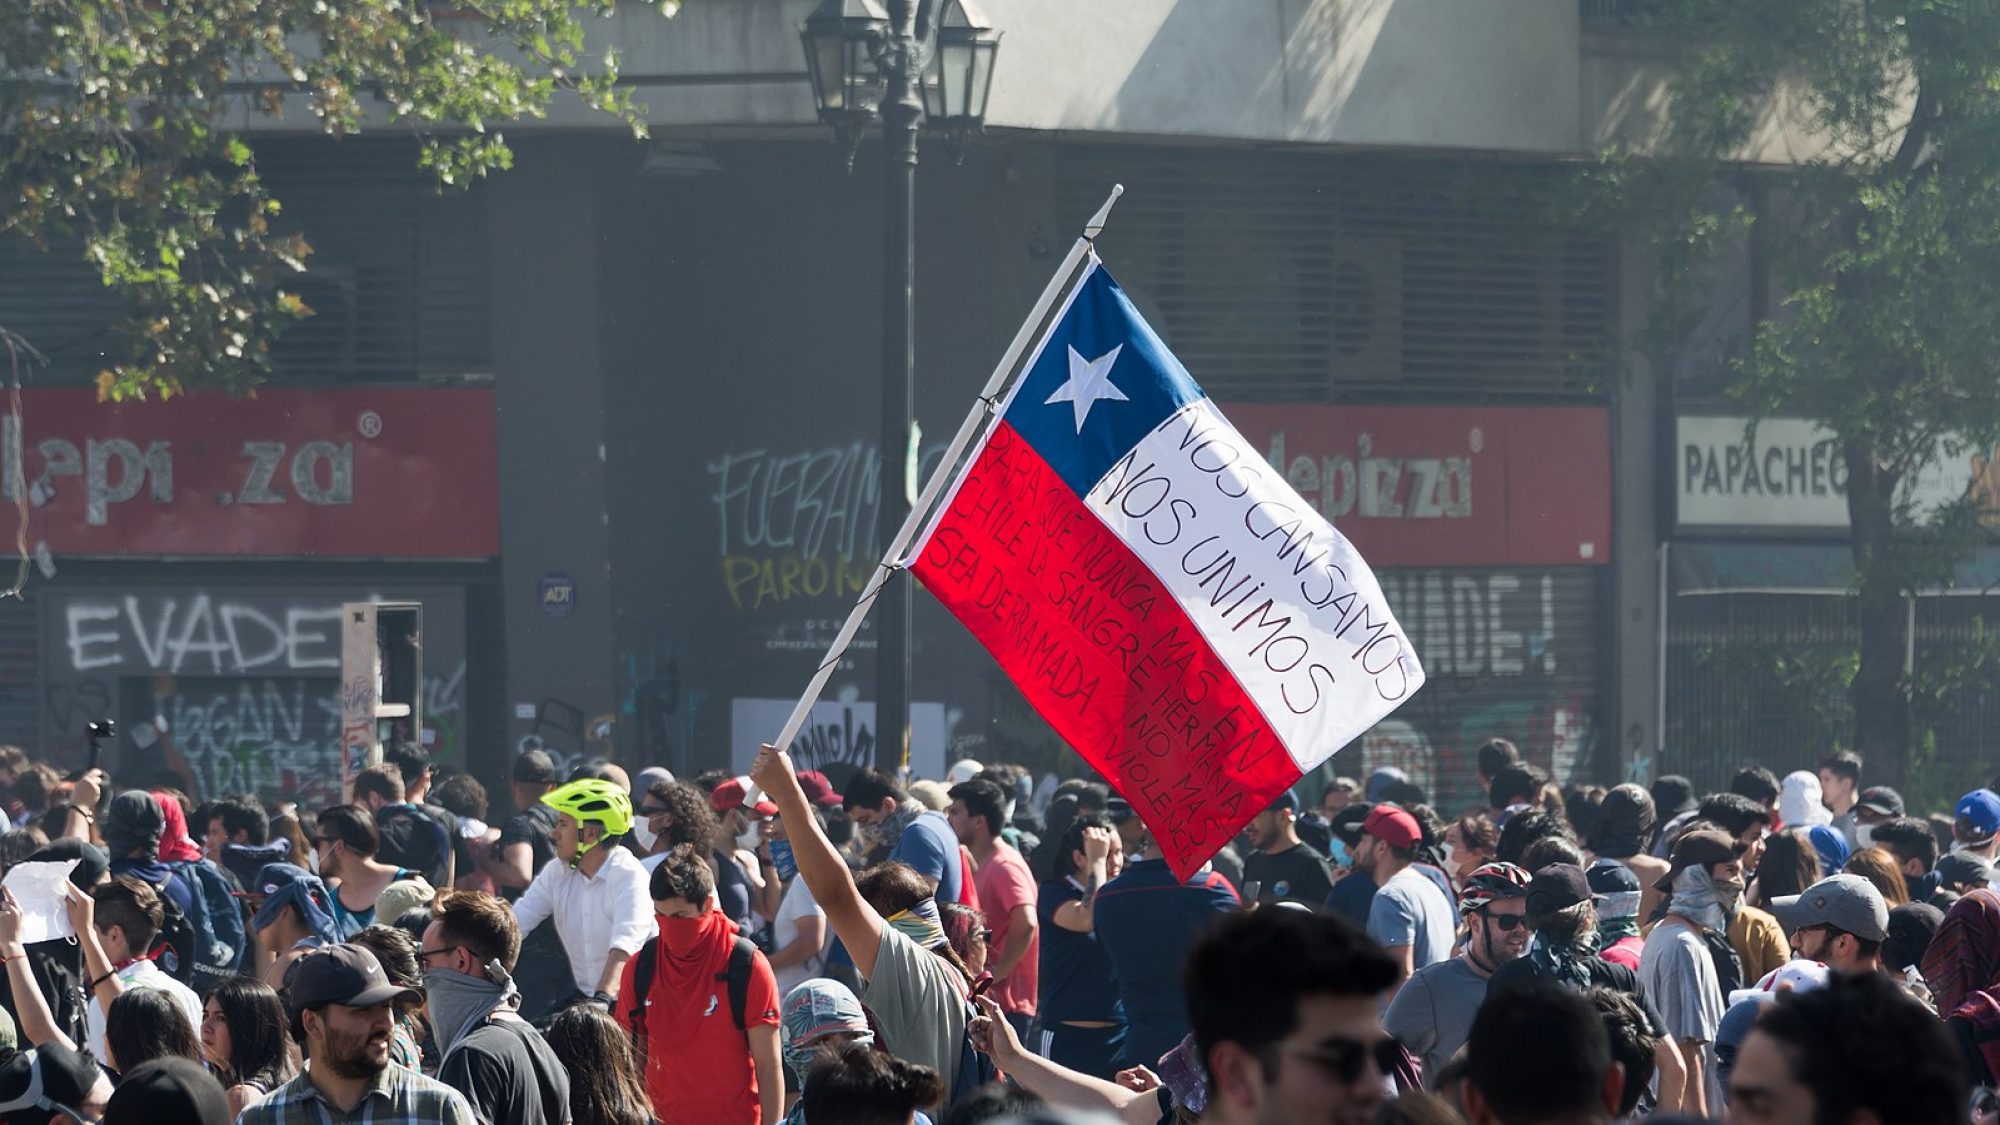 A Chilean flag is raised in the 2019 Protest in Santiago